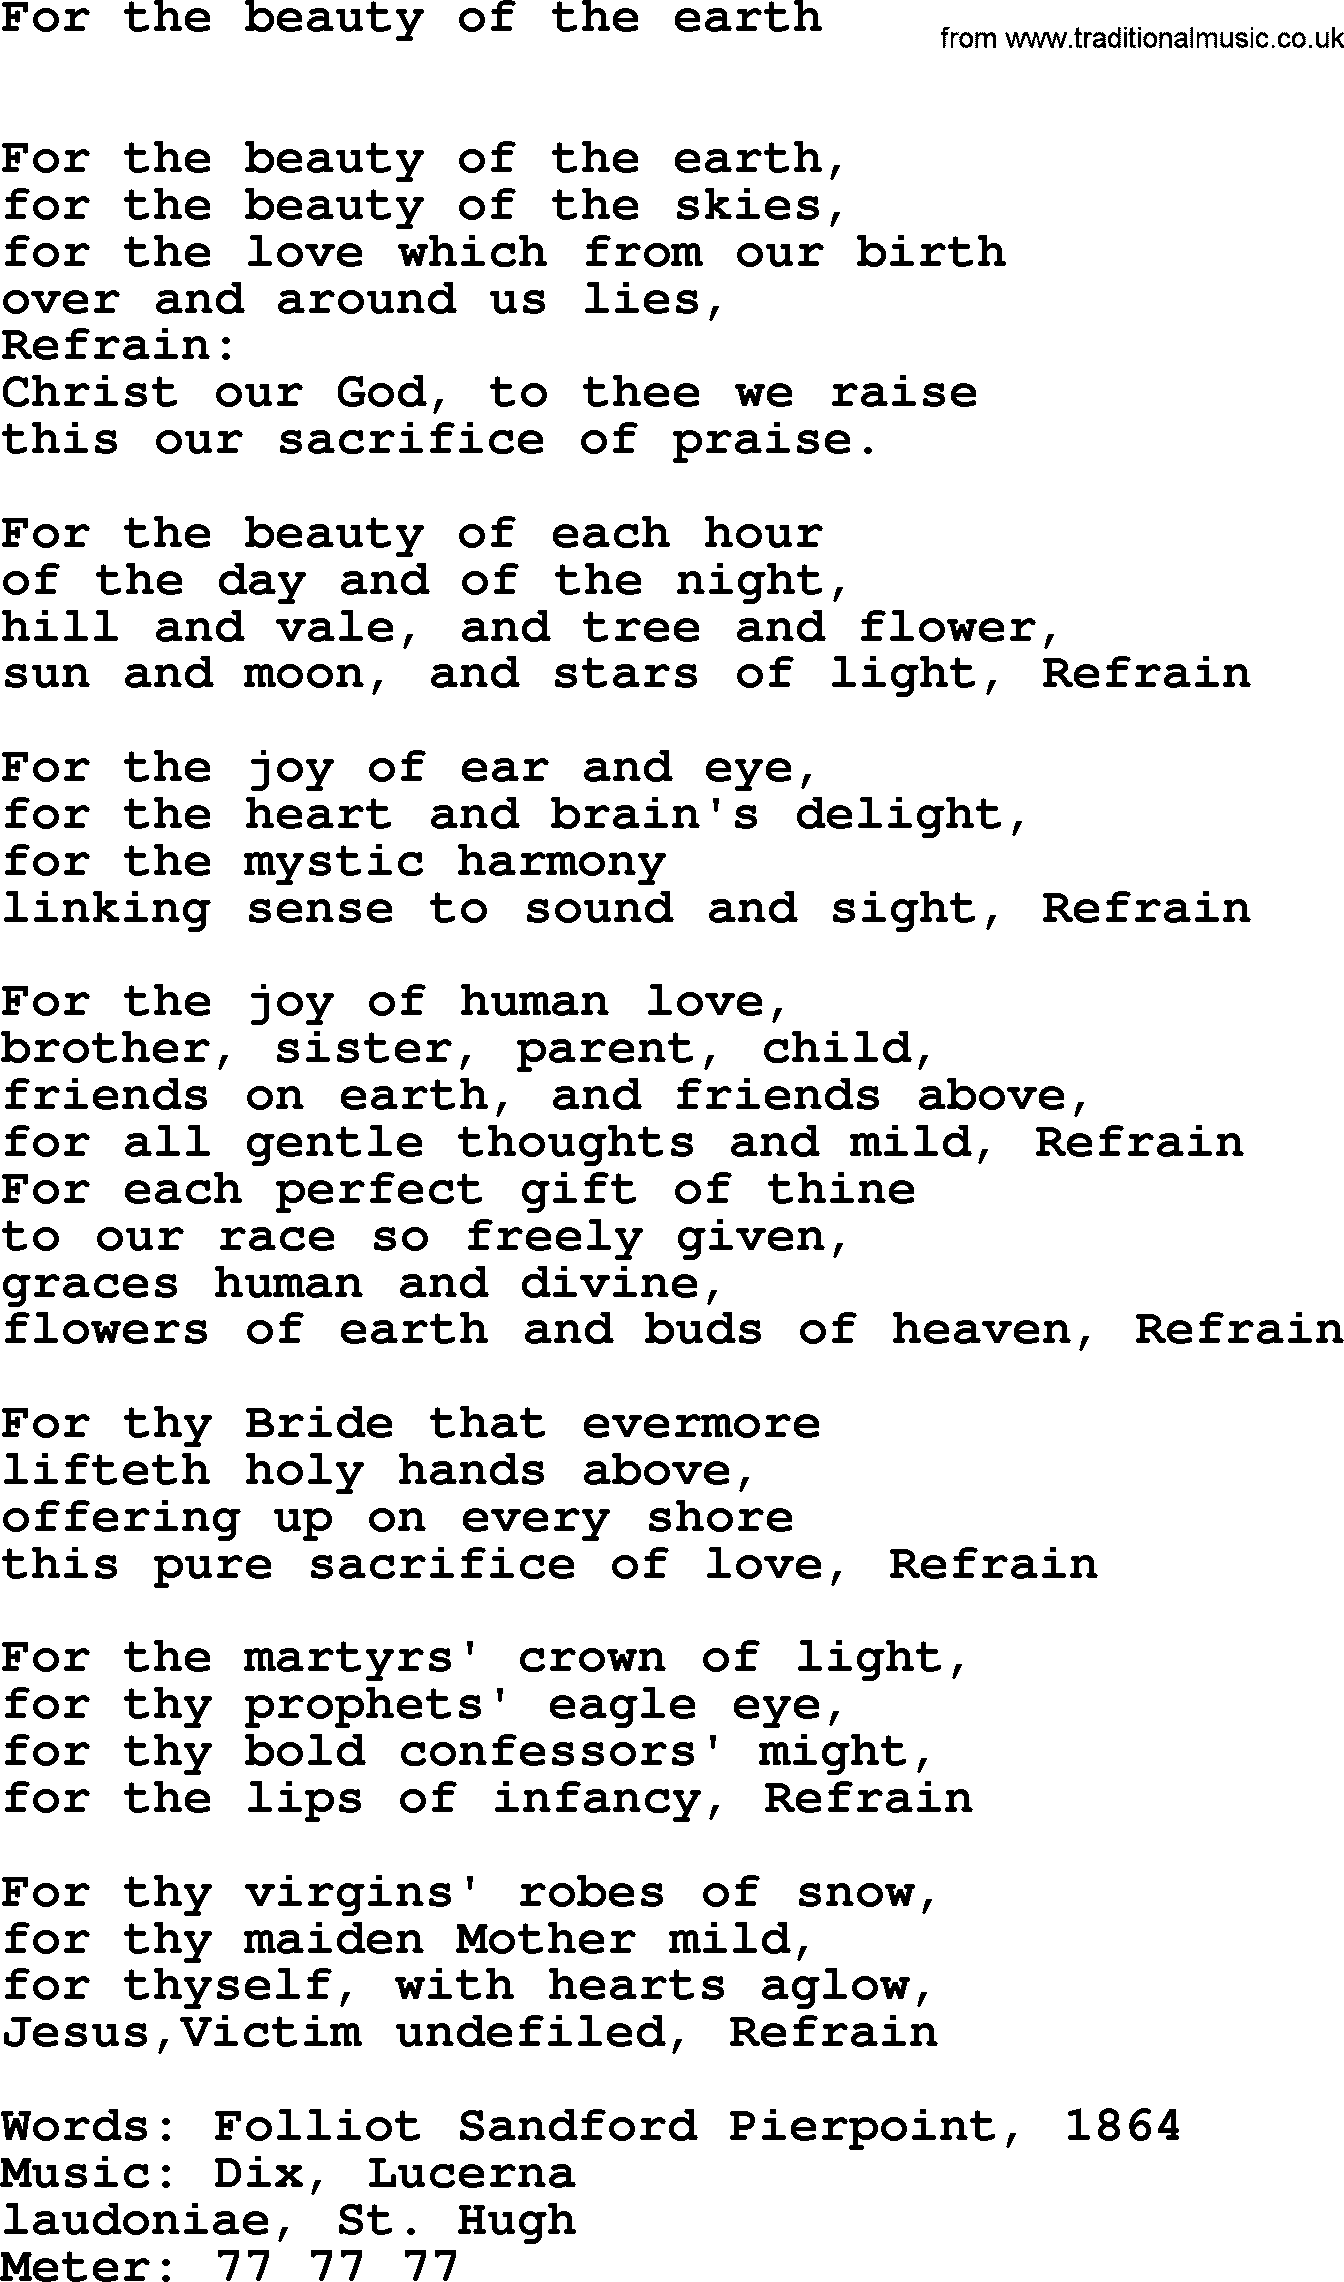 Book of Common Praise Hymn: For The Beauty Of The Earth.txt lyrics with midi music